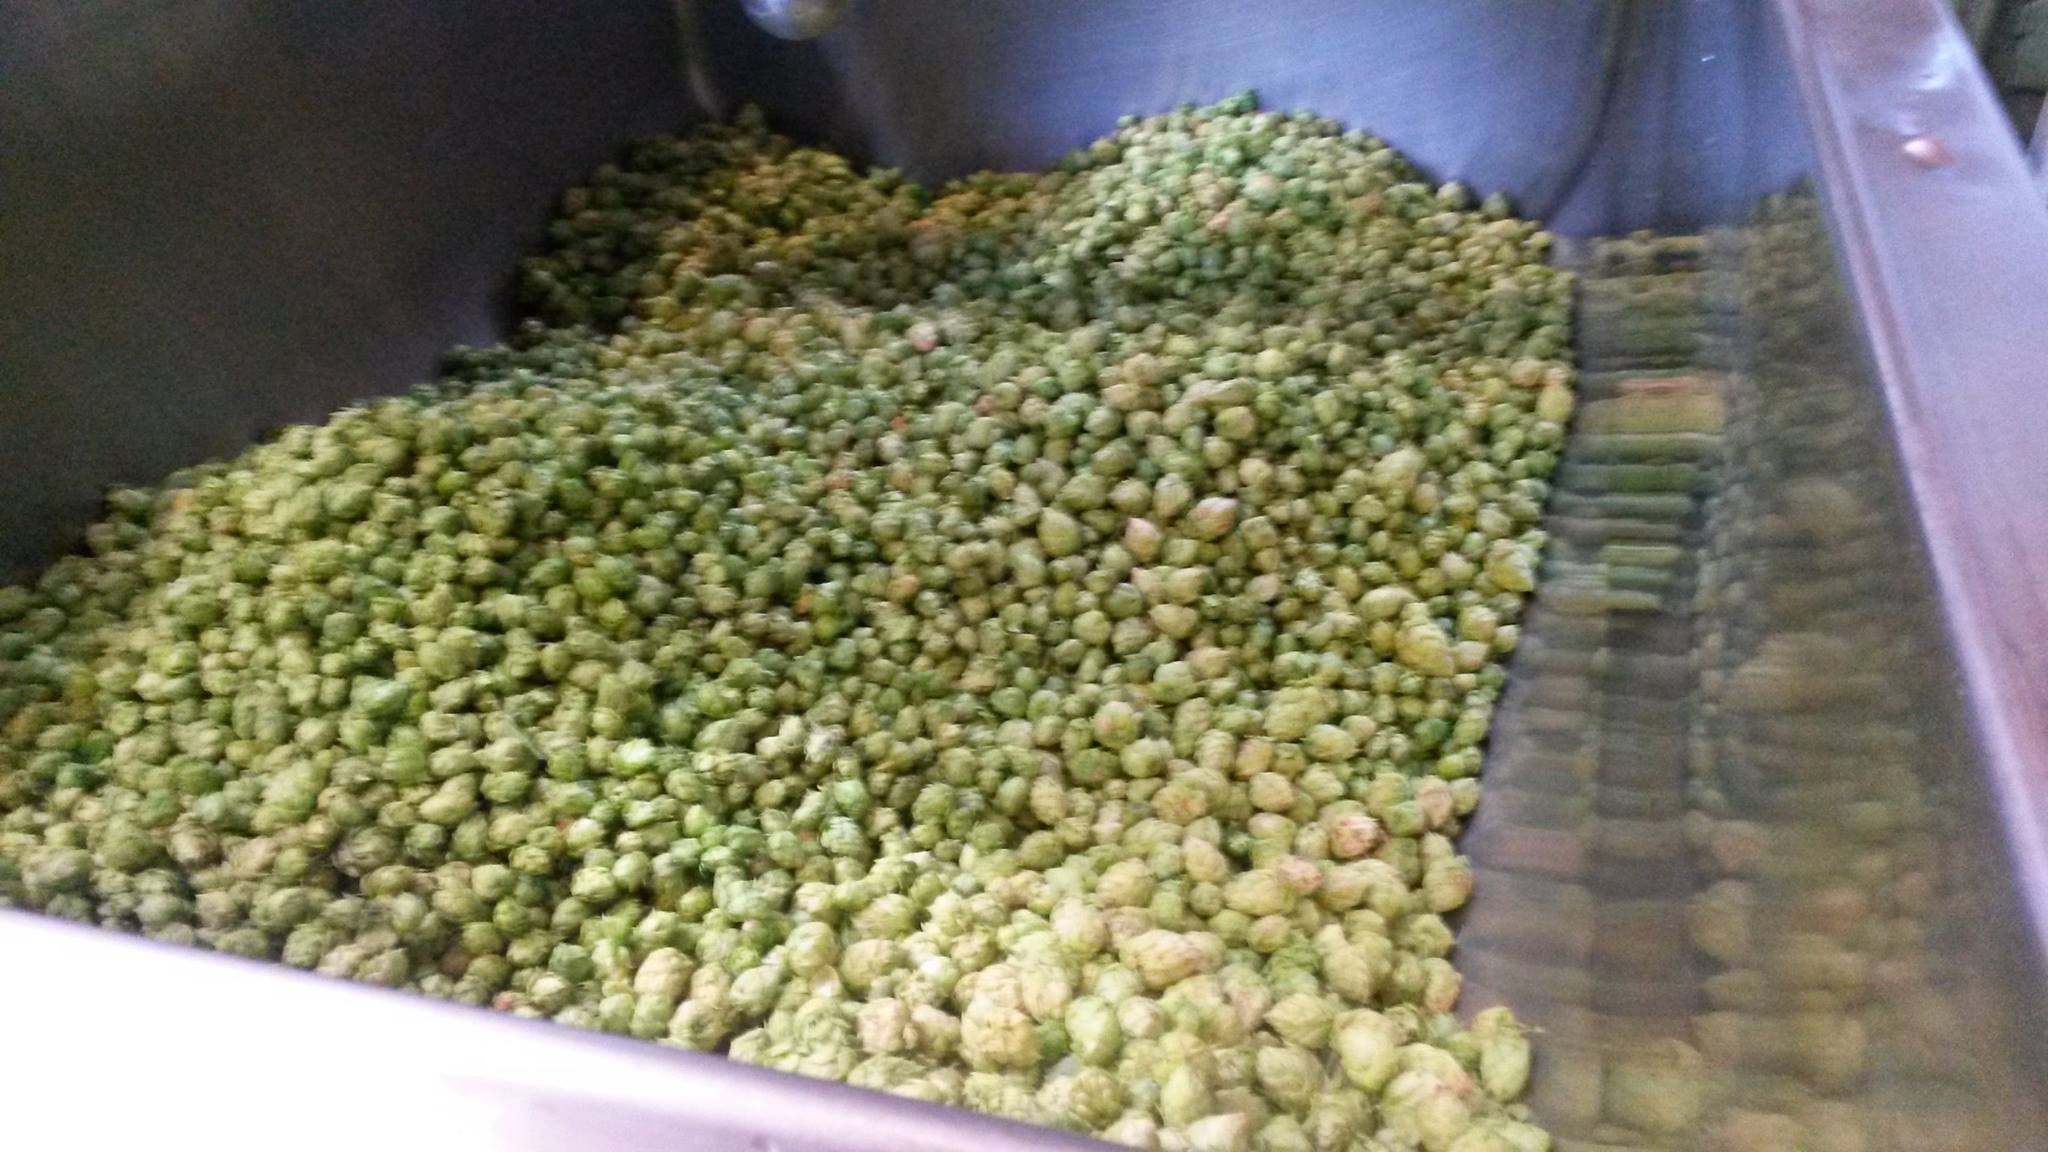 Hops photo from Nickel Beer Company